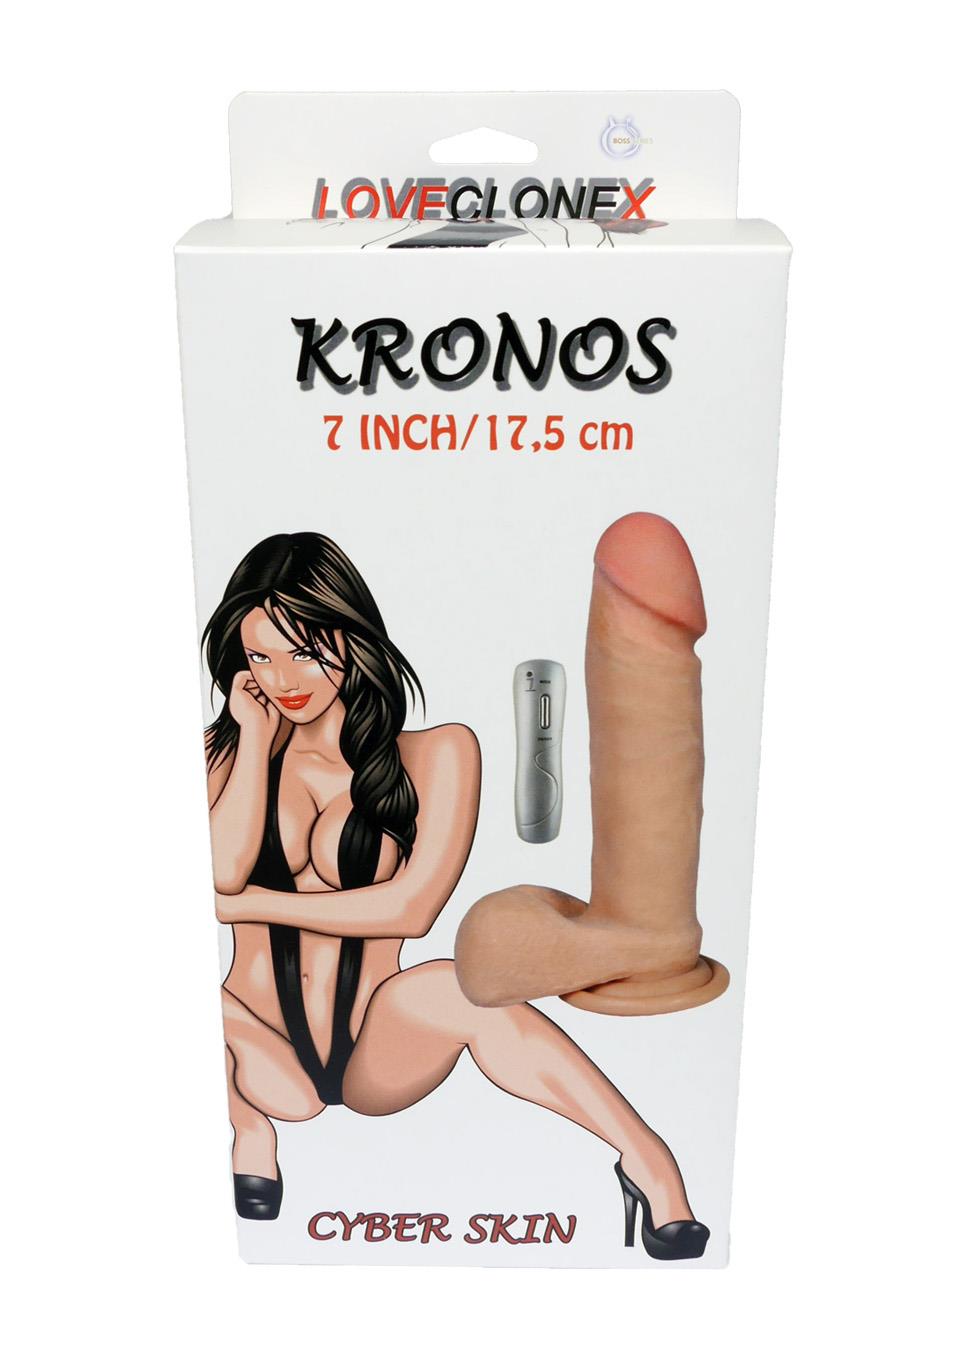 Bossoftoys - 21-00003 - Kronos - Loveclonex - Ultra Realistic Vibrator - Cyber skin feels like real - Better then Silicone - 5-7 cm thick - Suction Cup - Wired Remote - Flesh - 7 inch / 17,5 cm